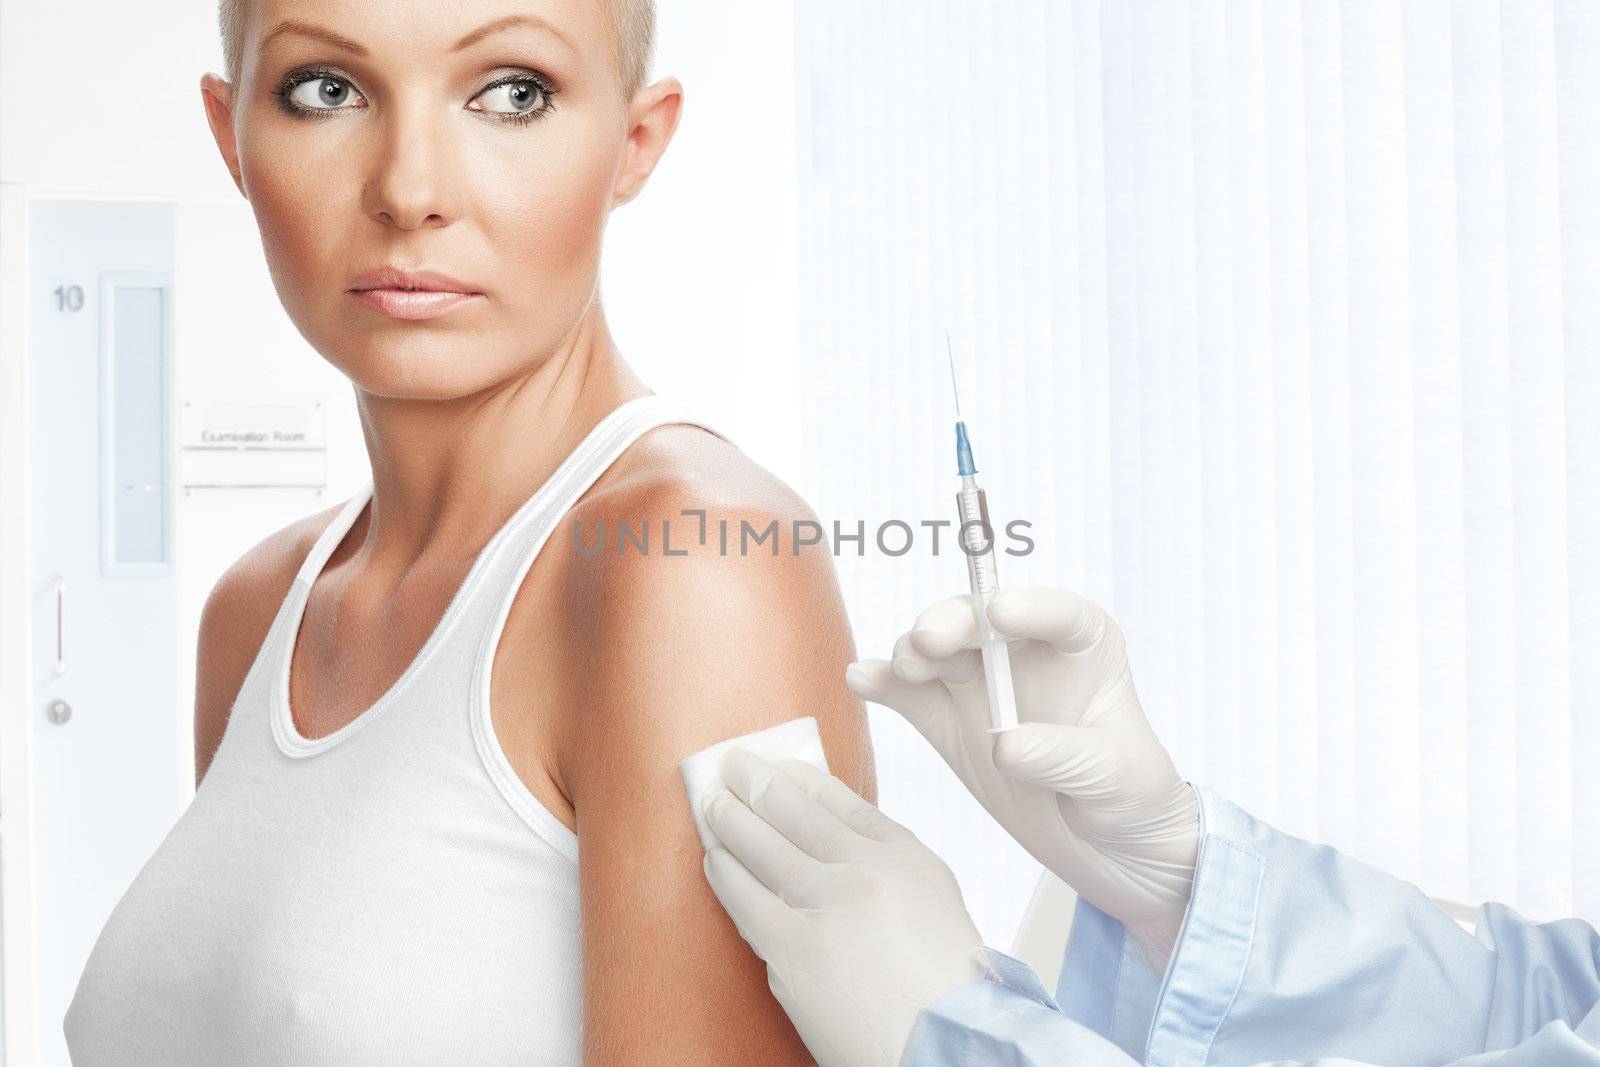 Portrait of young nice woman on medical examination